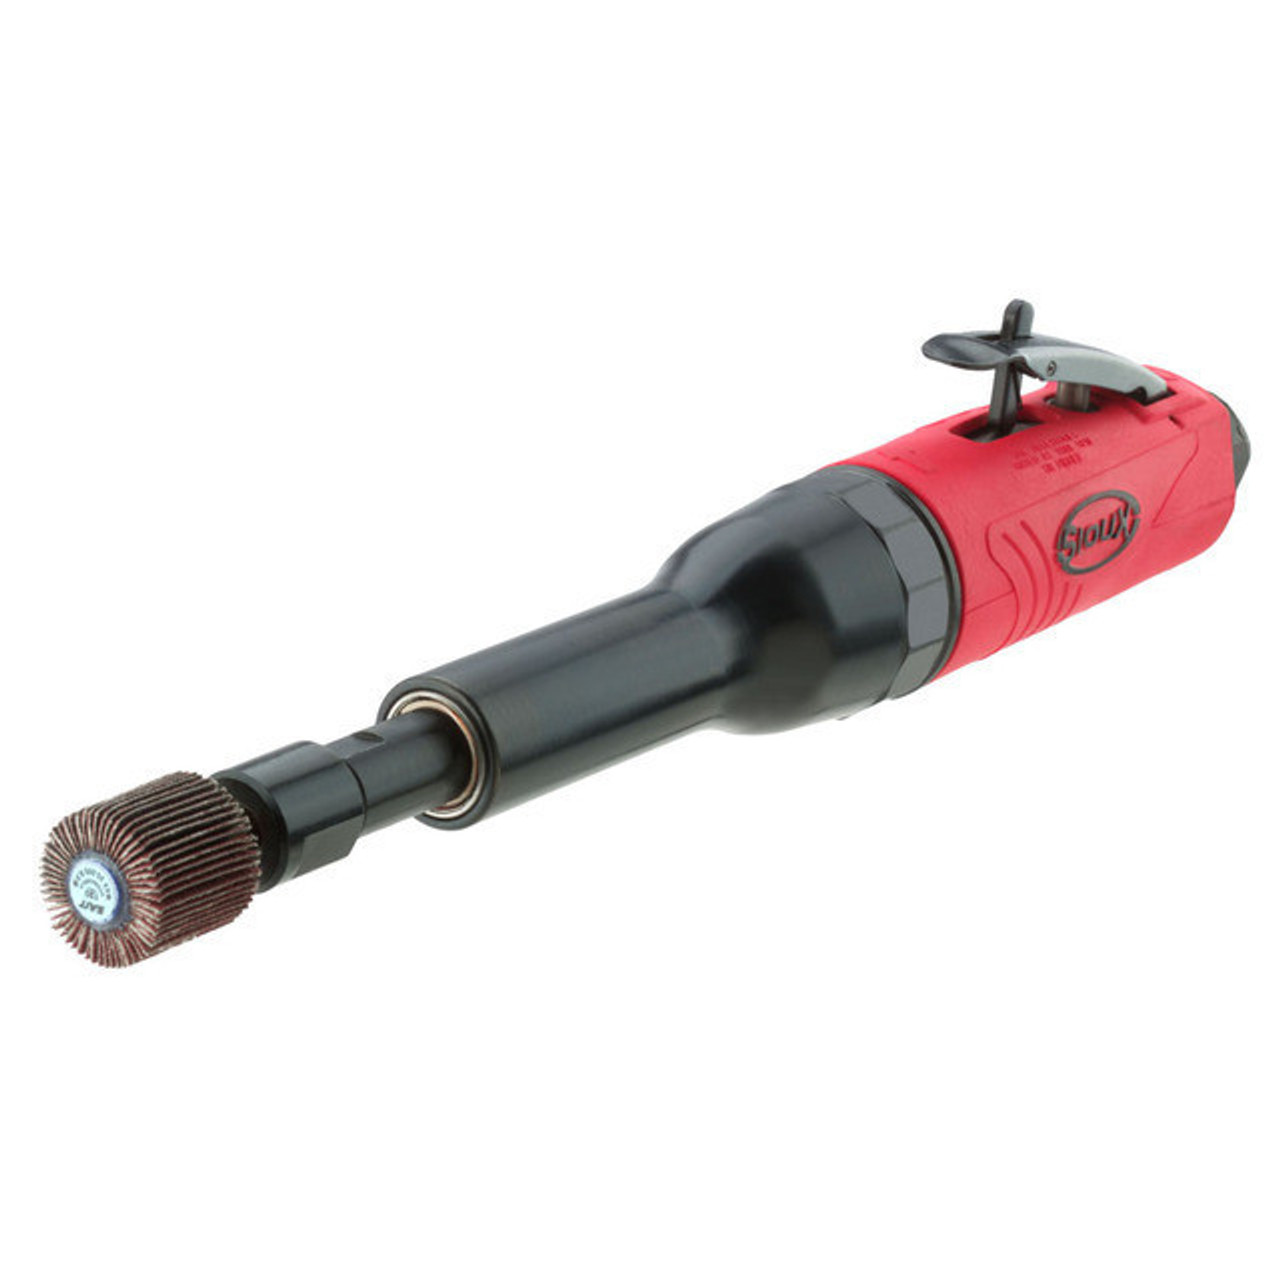 Sioux Tools SXG05S23S Extended Die Grinder or 0.5 HP or 23000 RPM or Rear Exhaust or 1/4 Collet